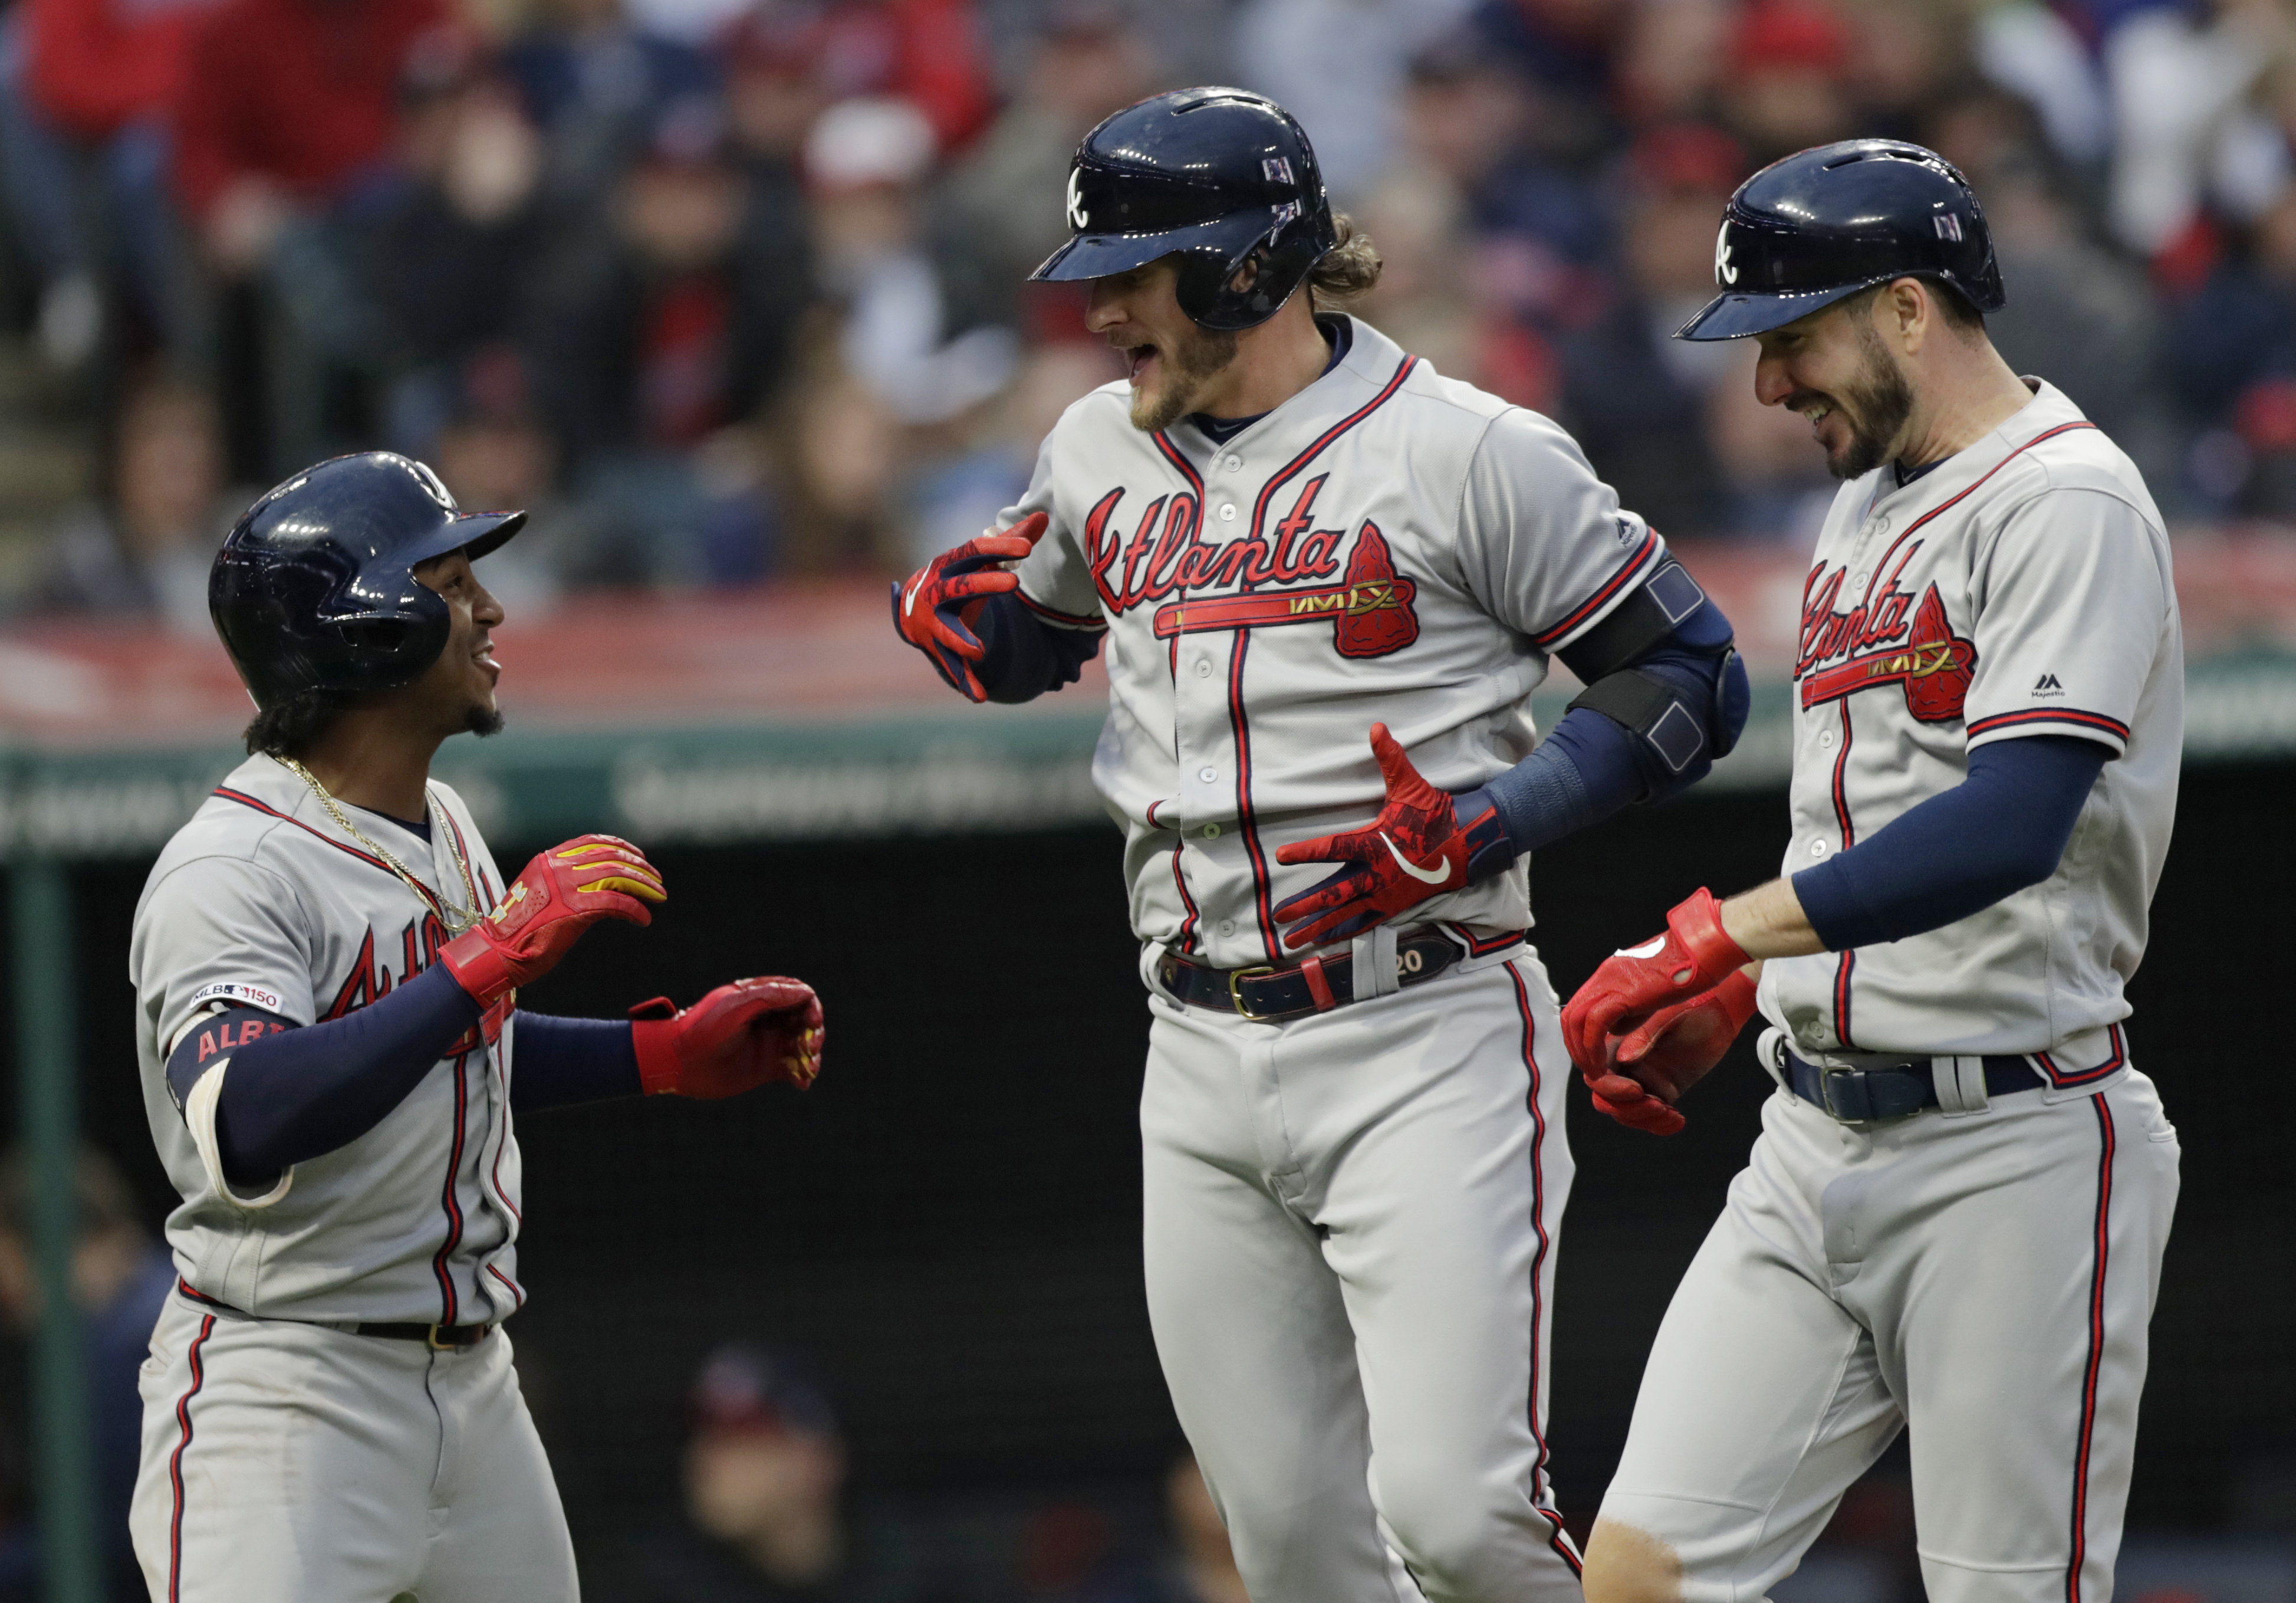 Donaldson homers twice, Braves rout Indians 11-5